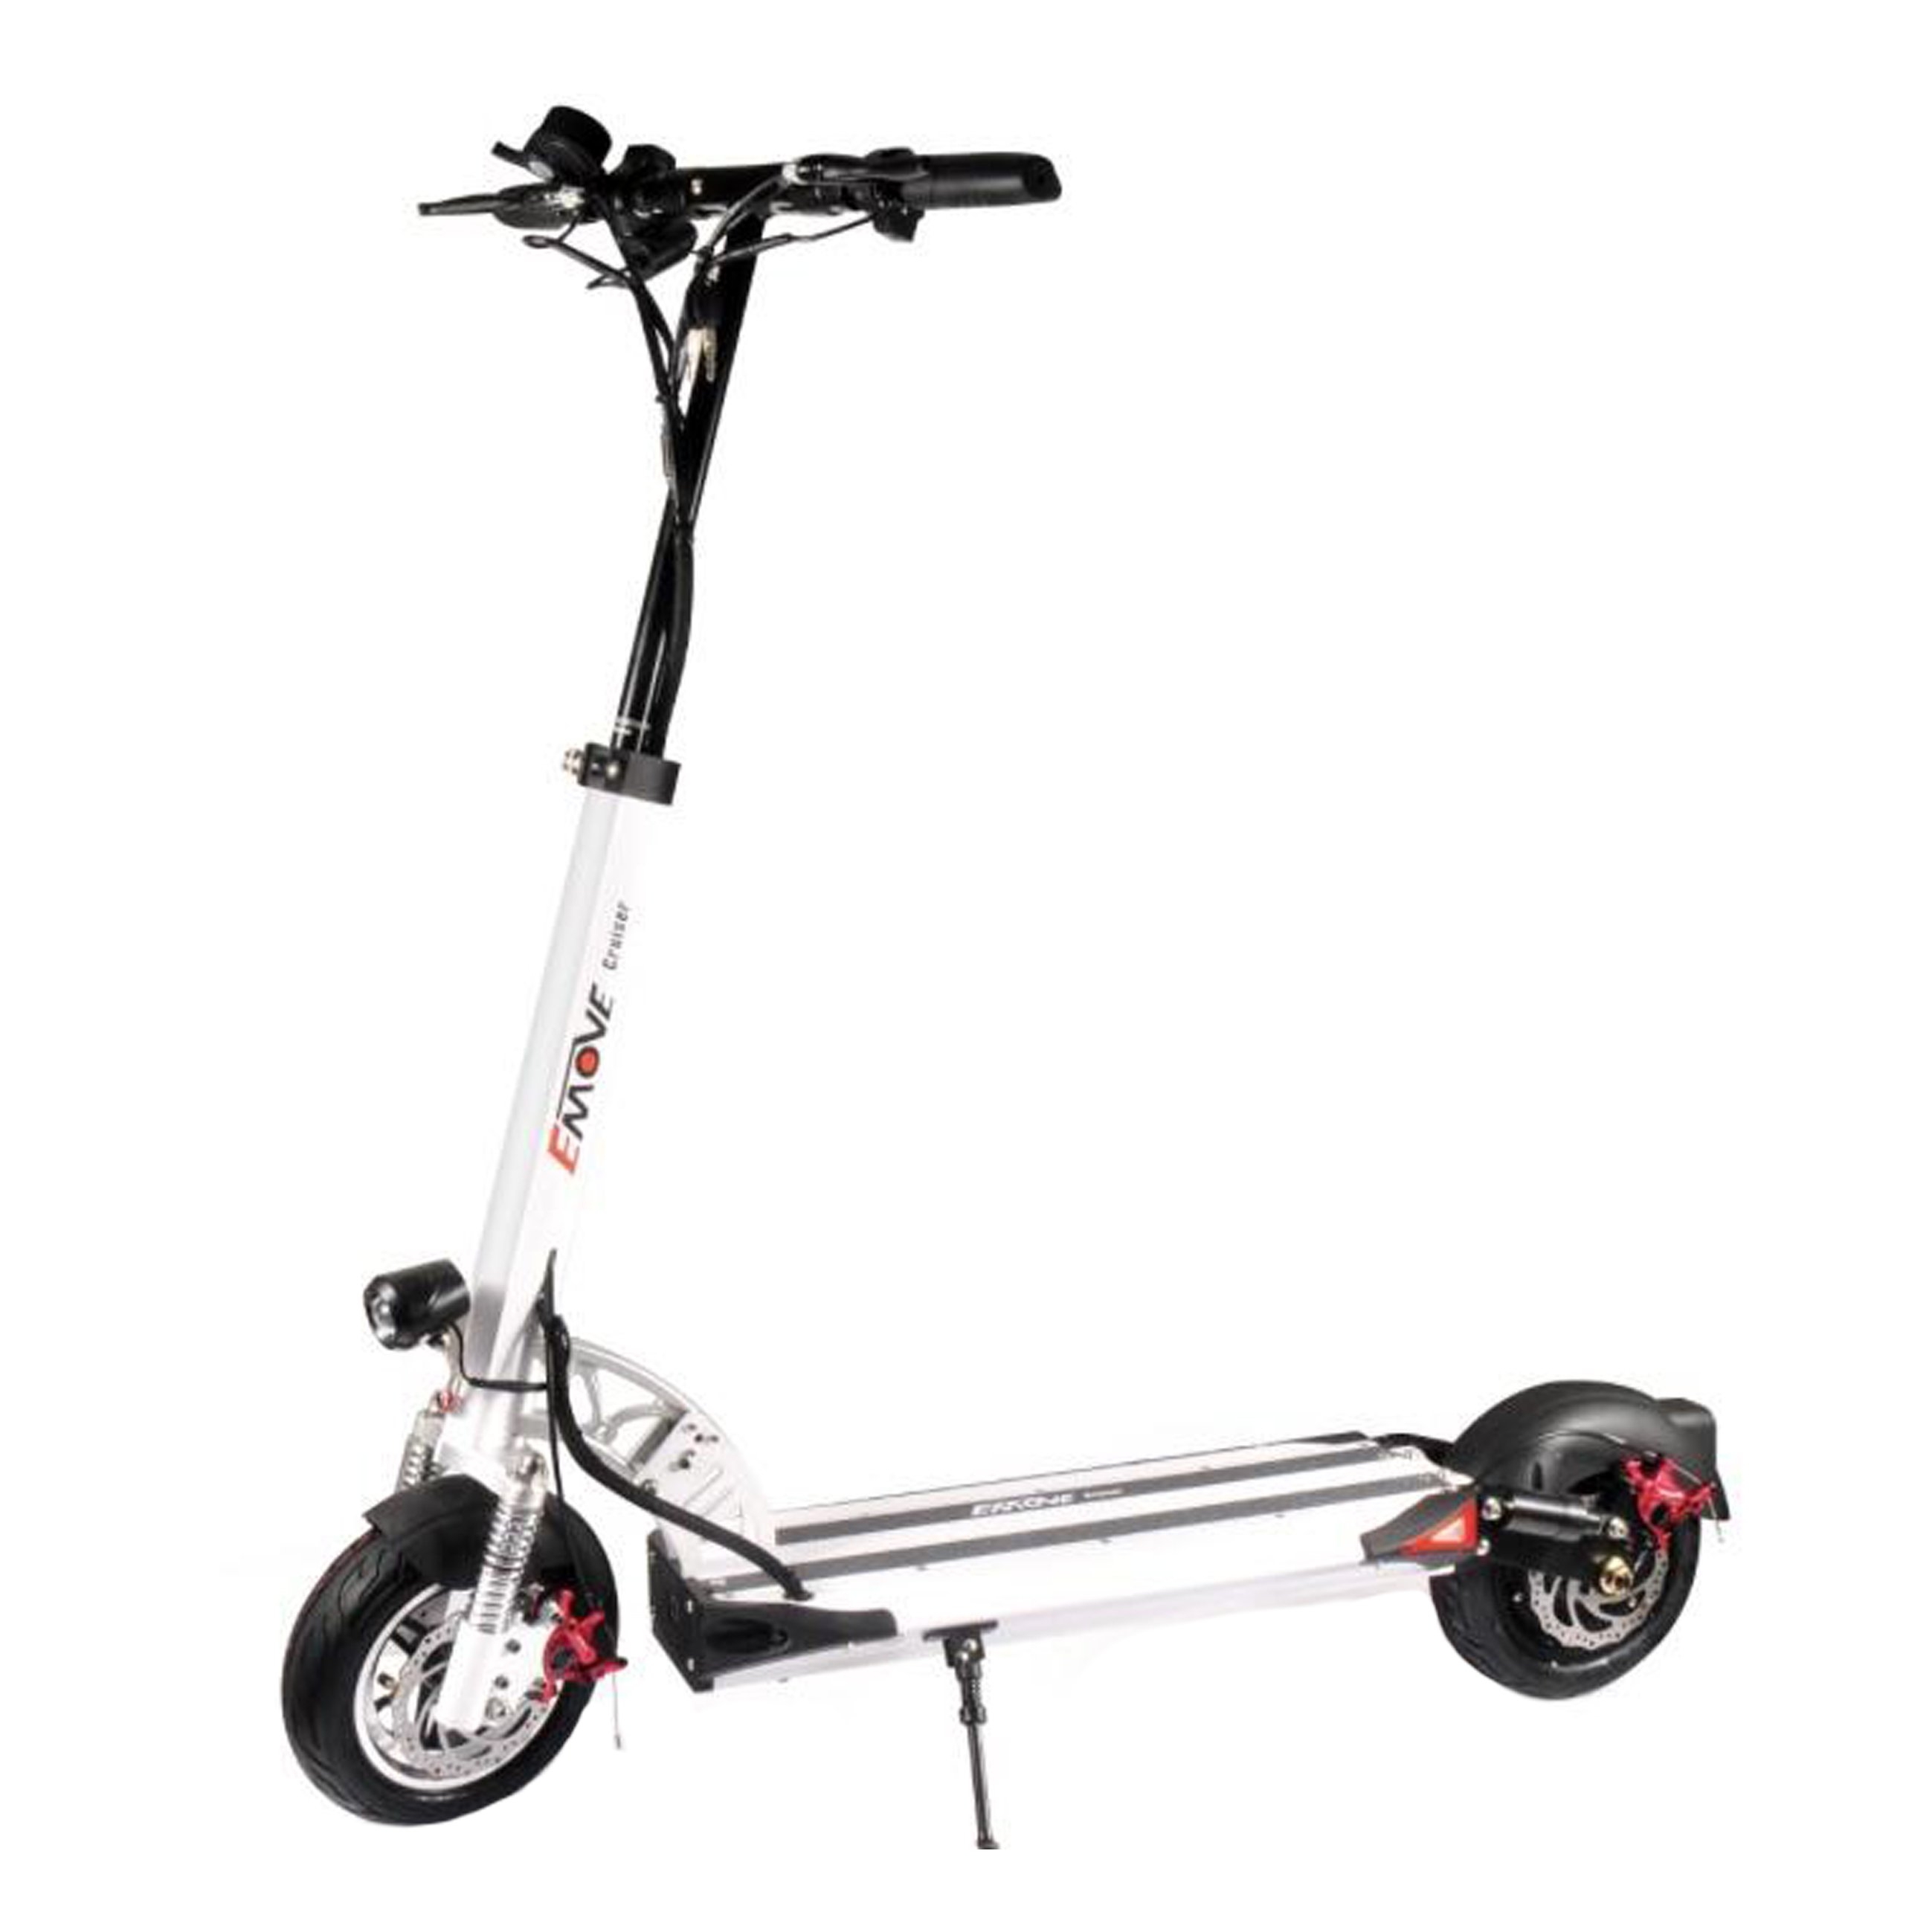 Emove Cruiser Electric Scooter – White